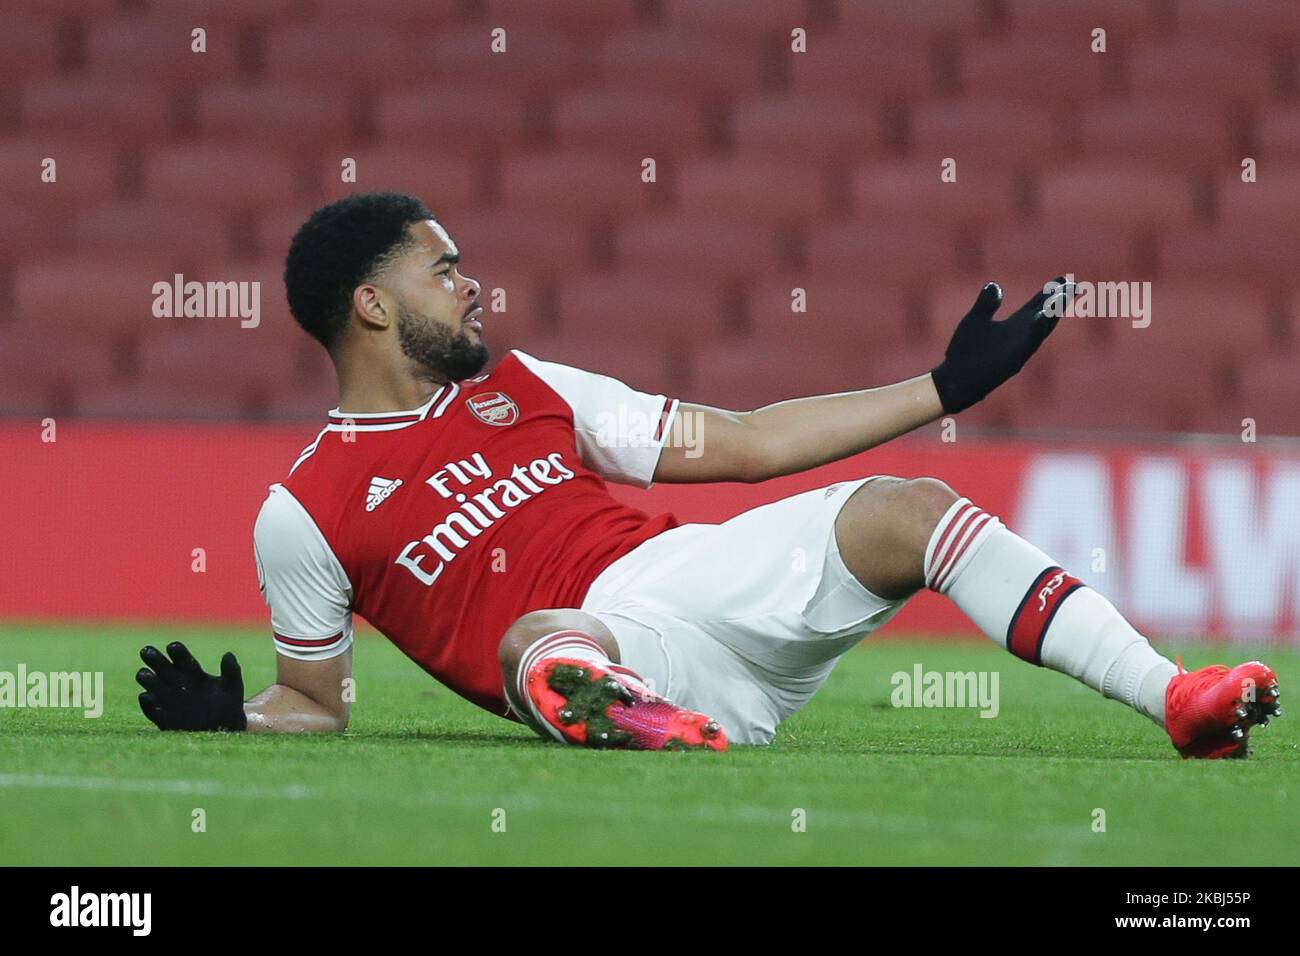 Trae Coyle of Arsenal u23 reacts during the Premier League 2 match between Arsenal Under 23 and Manchester City Under 23 at the Emirates Stadium, London on Saturday 29th February 2020. (Photo by Jacques Feeney/MINews/NurPhoto) Stock Photo